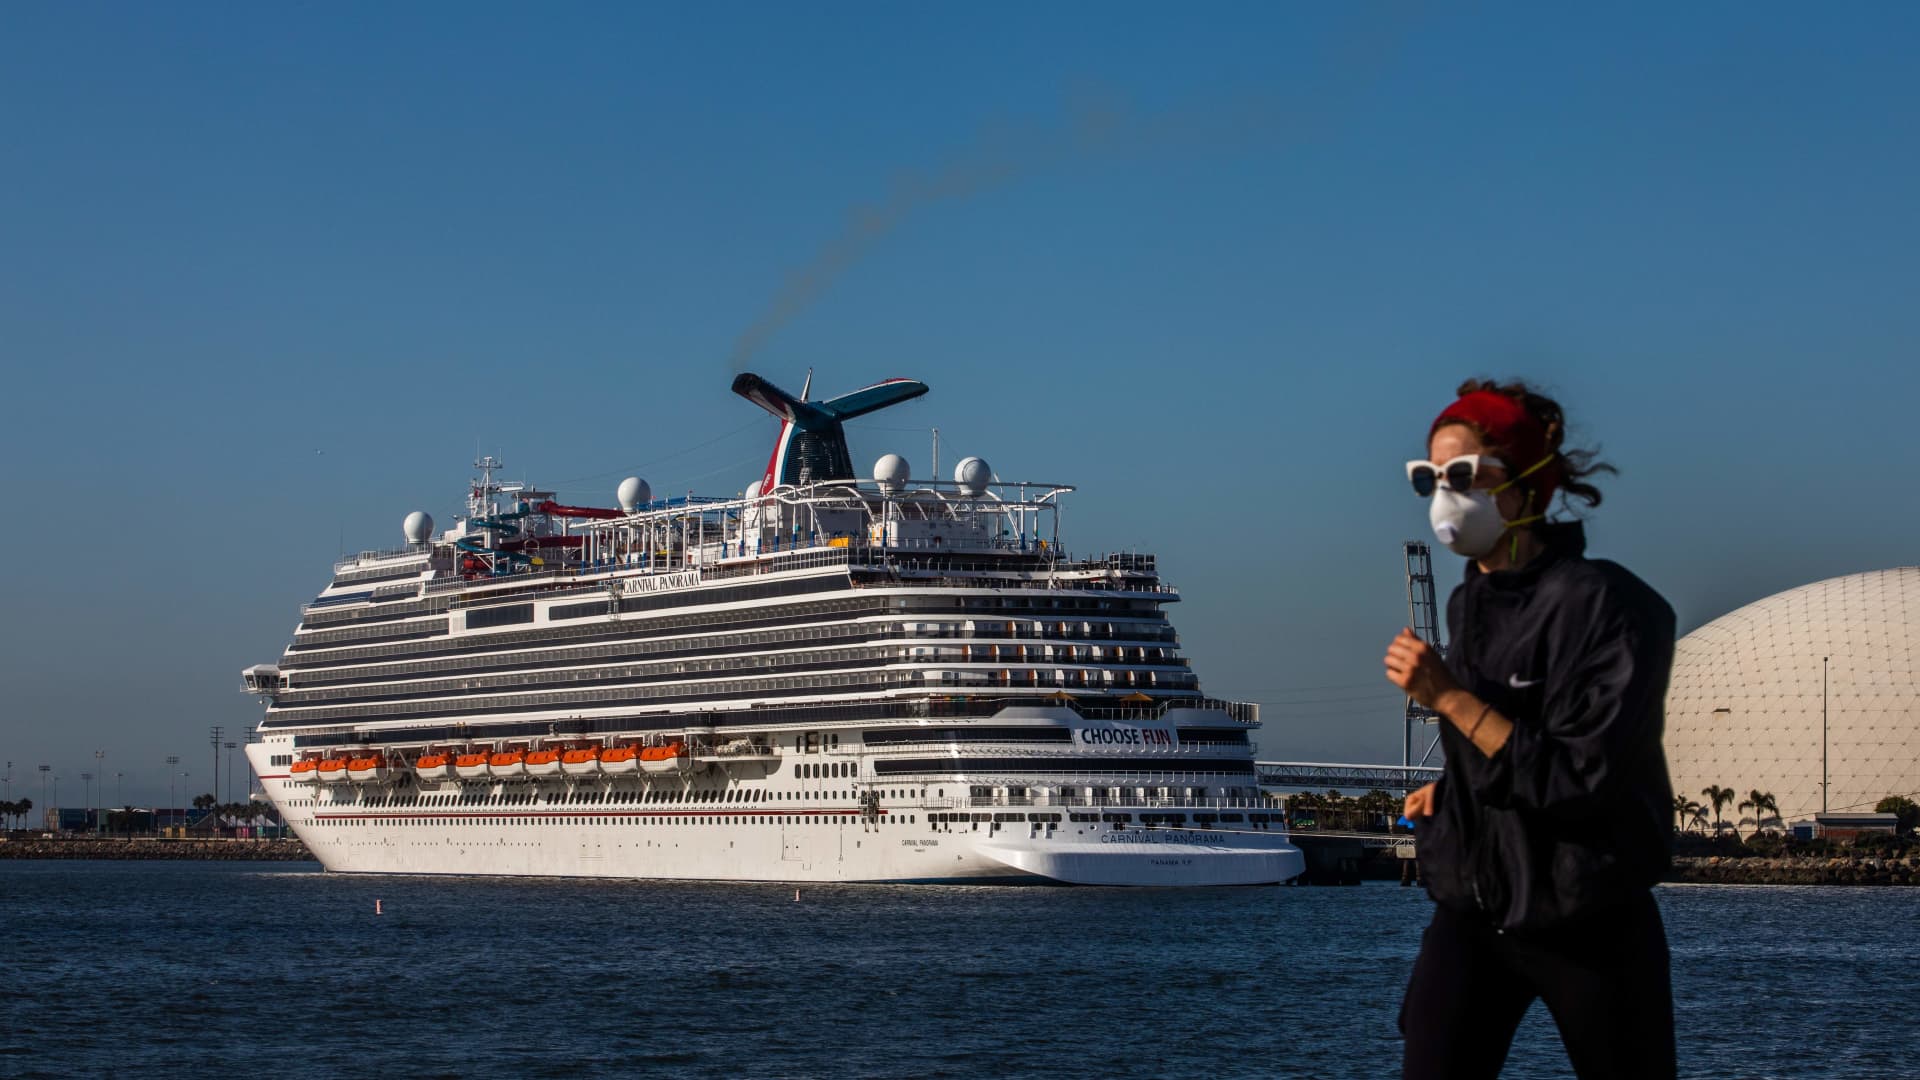 Argus downgrades Carnival as fuel costs rise and omicron surges